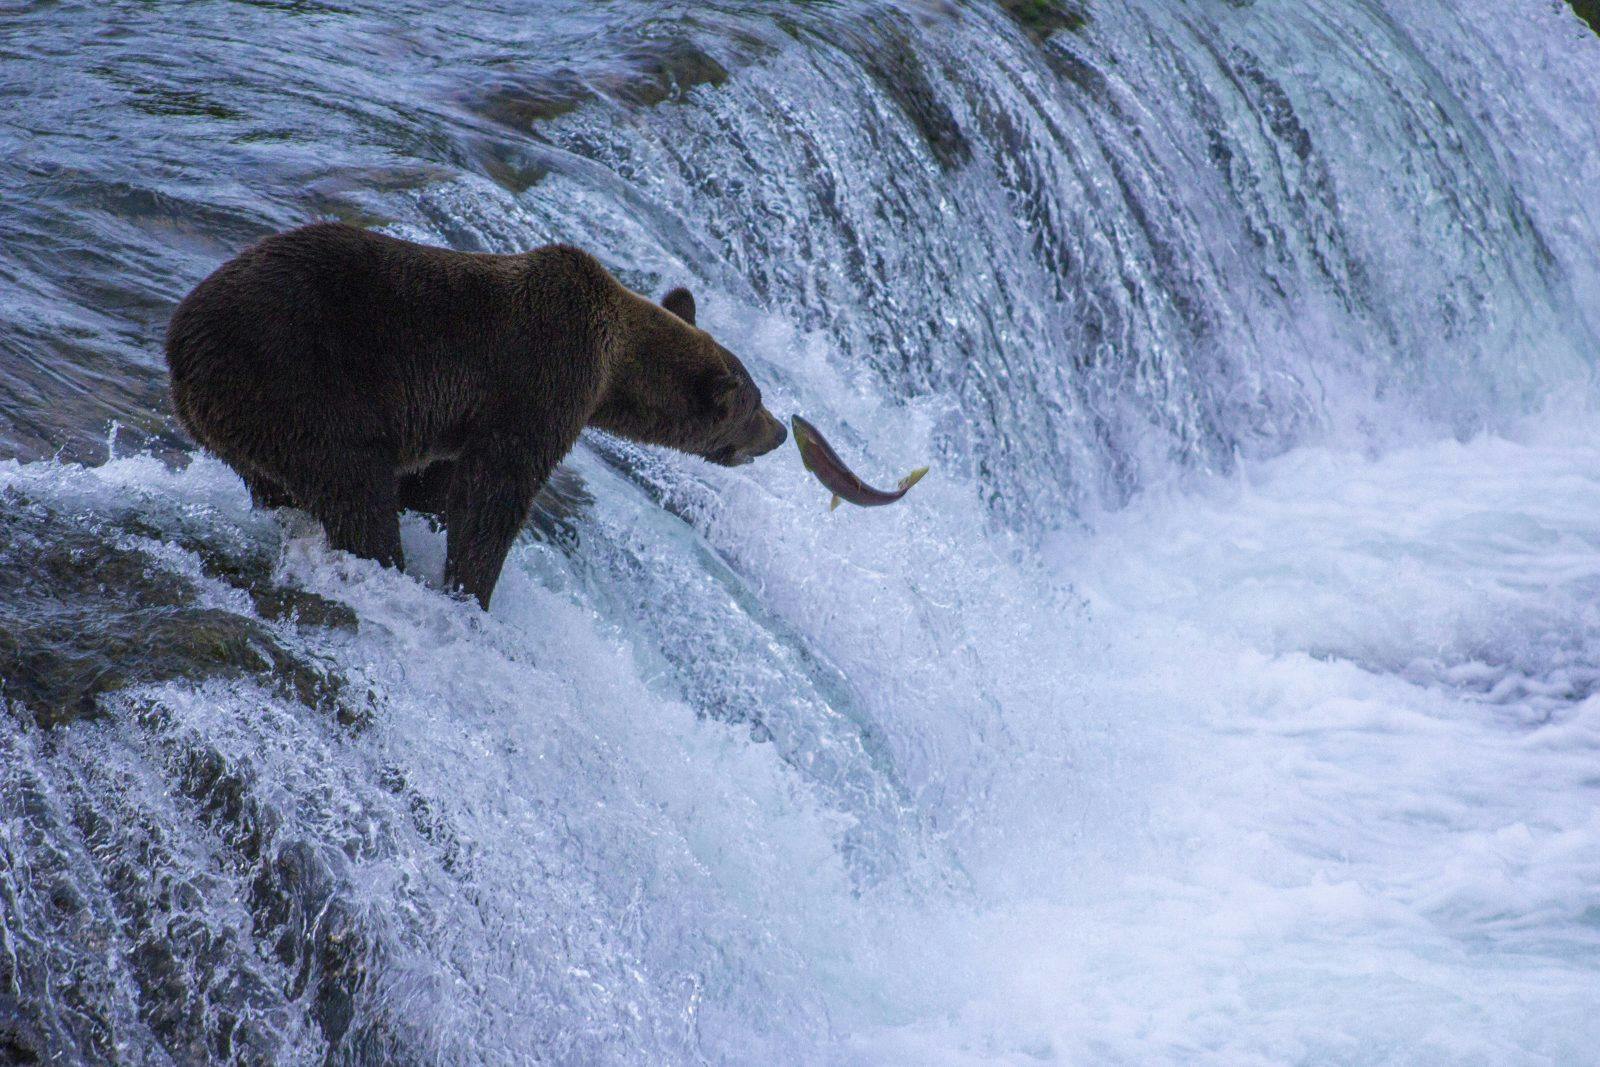 A brown bear waiting for the right salmon in Katmai National Park. Photo by: Sam Carter